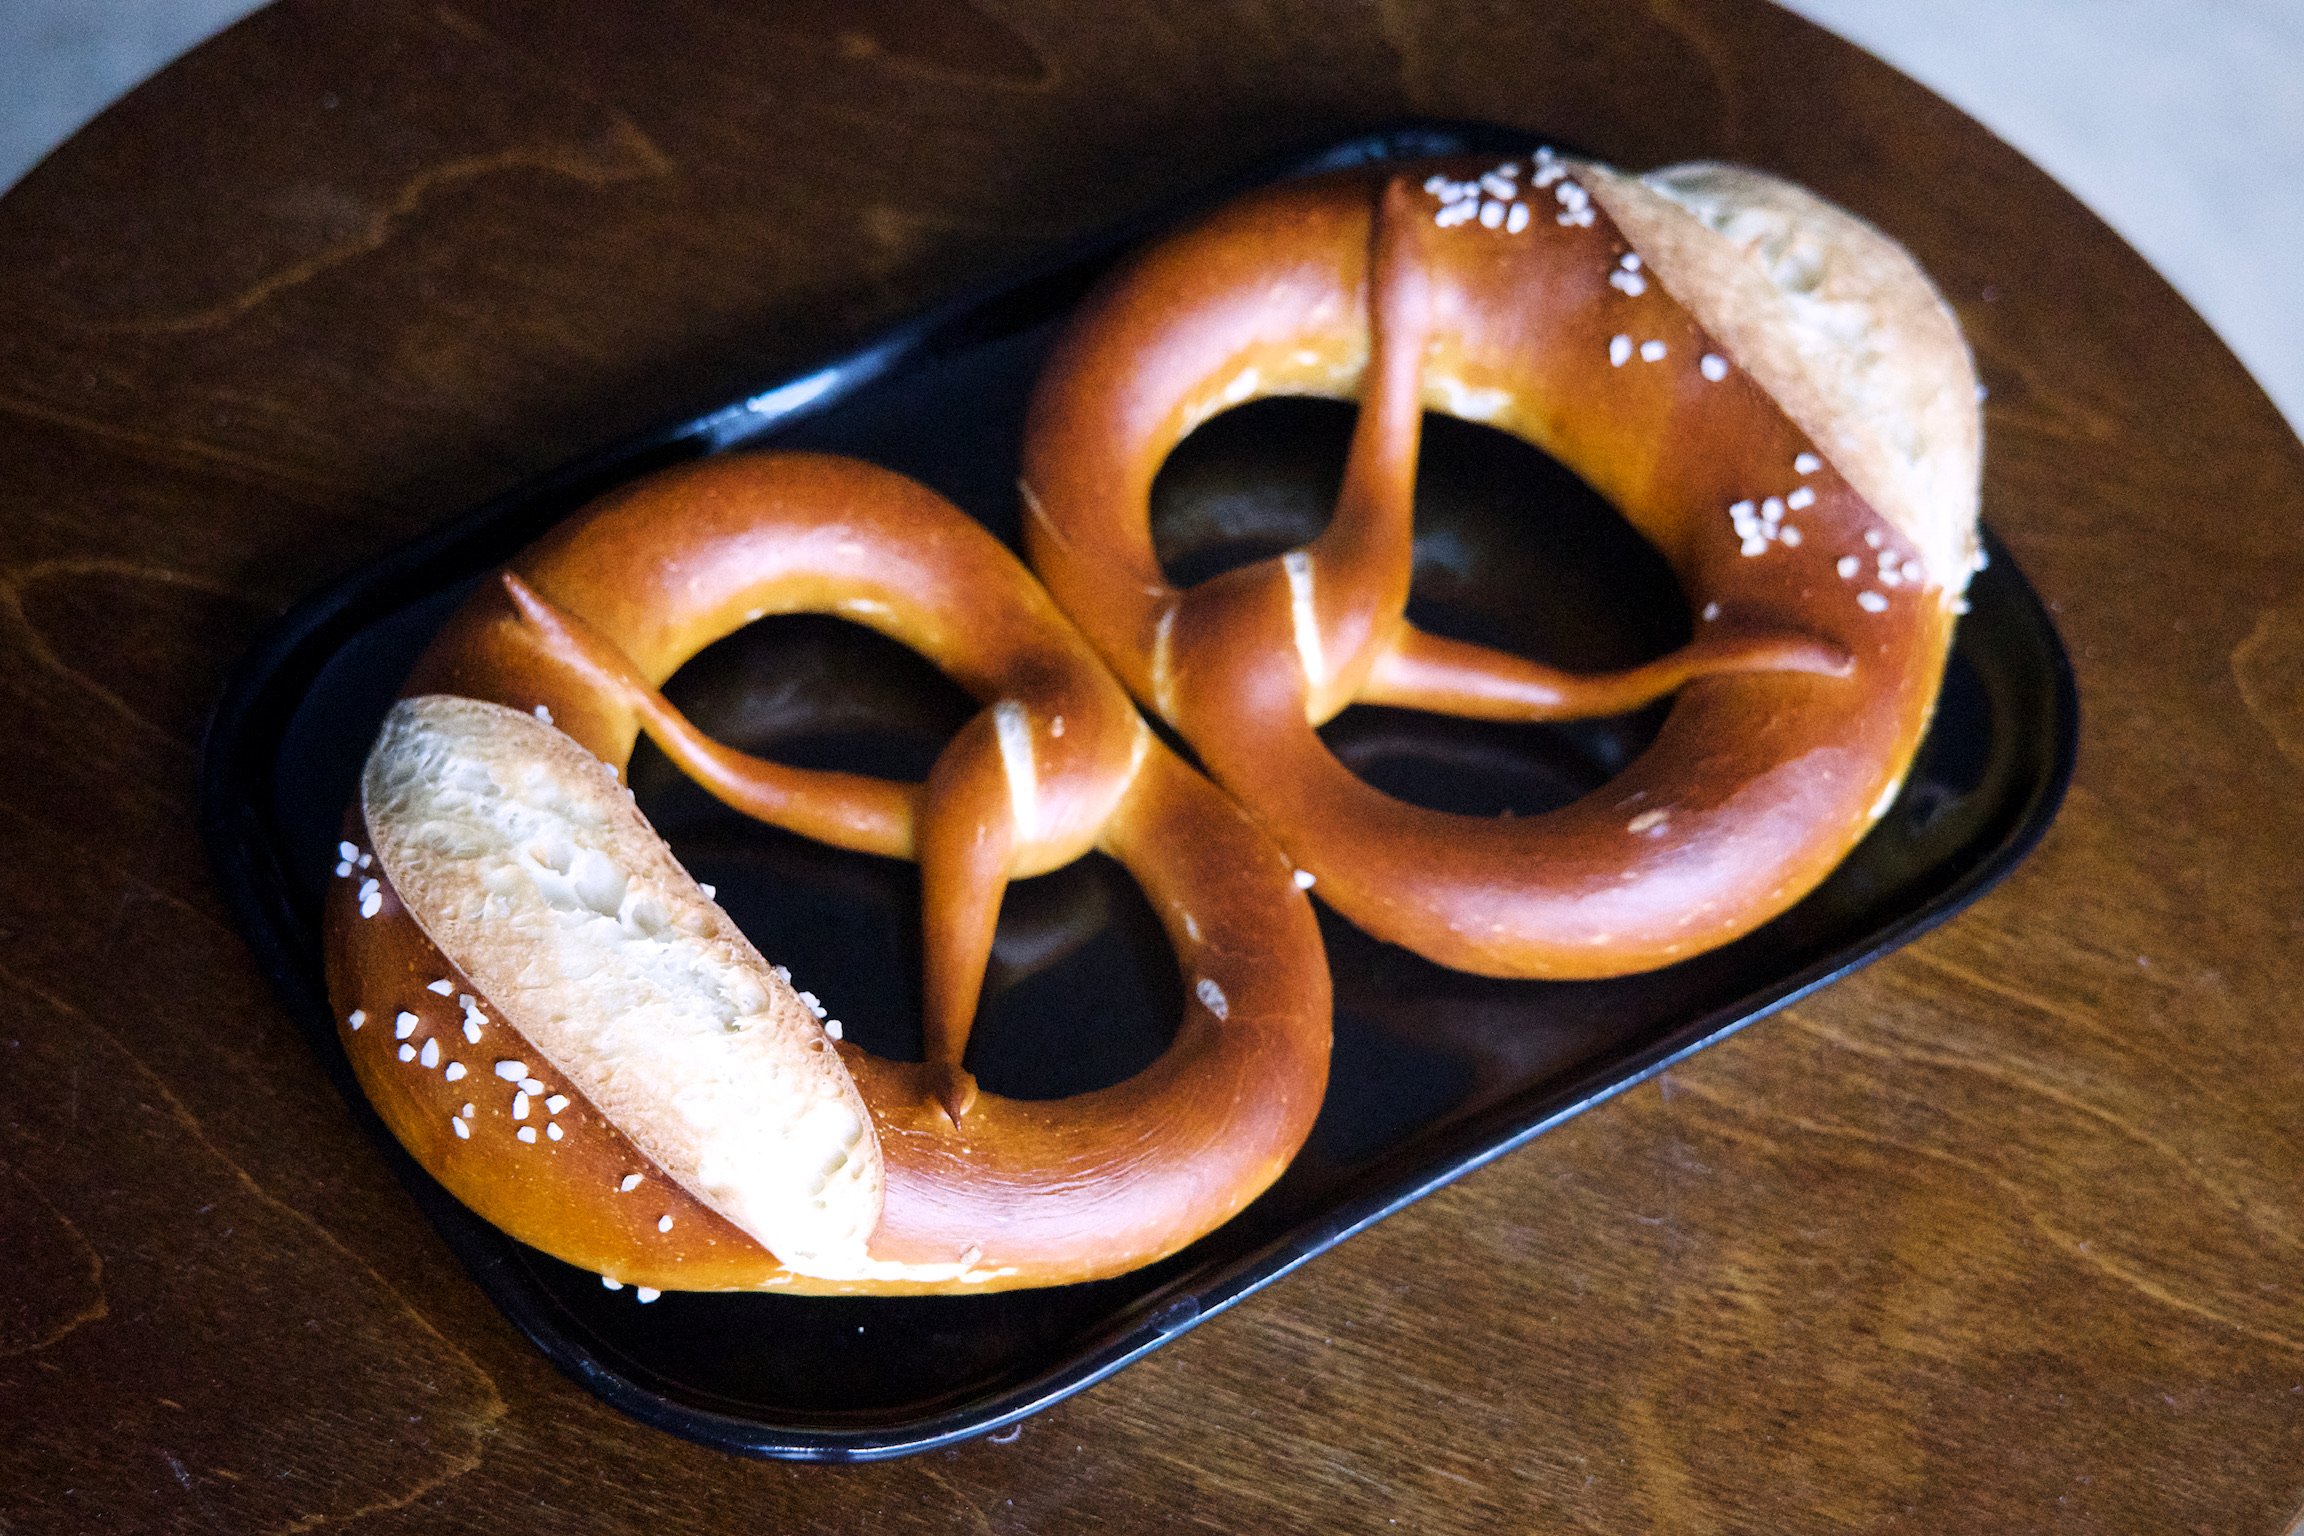 Two pretzels on a black rectangular plate facing each other.